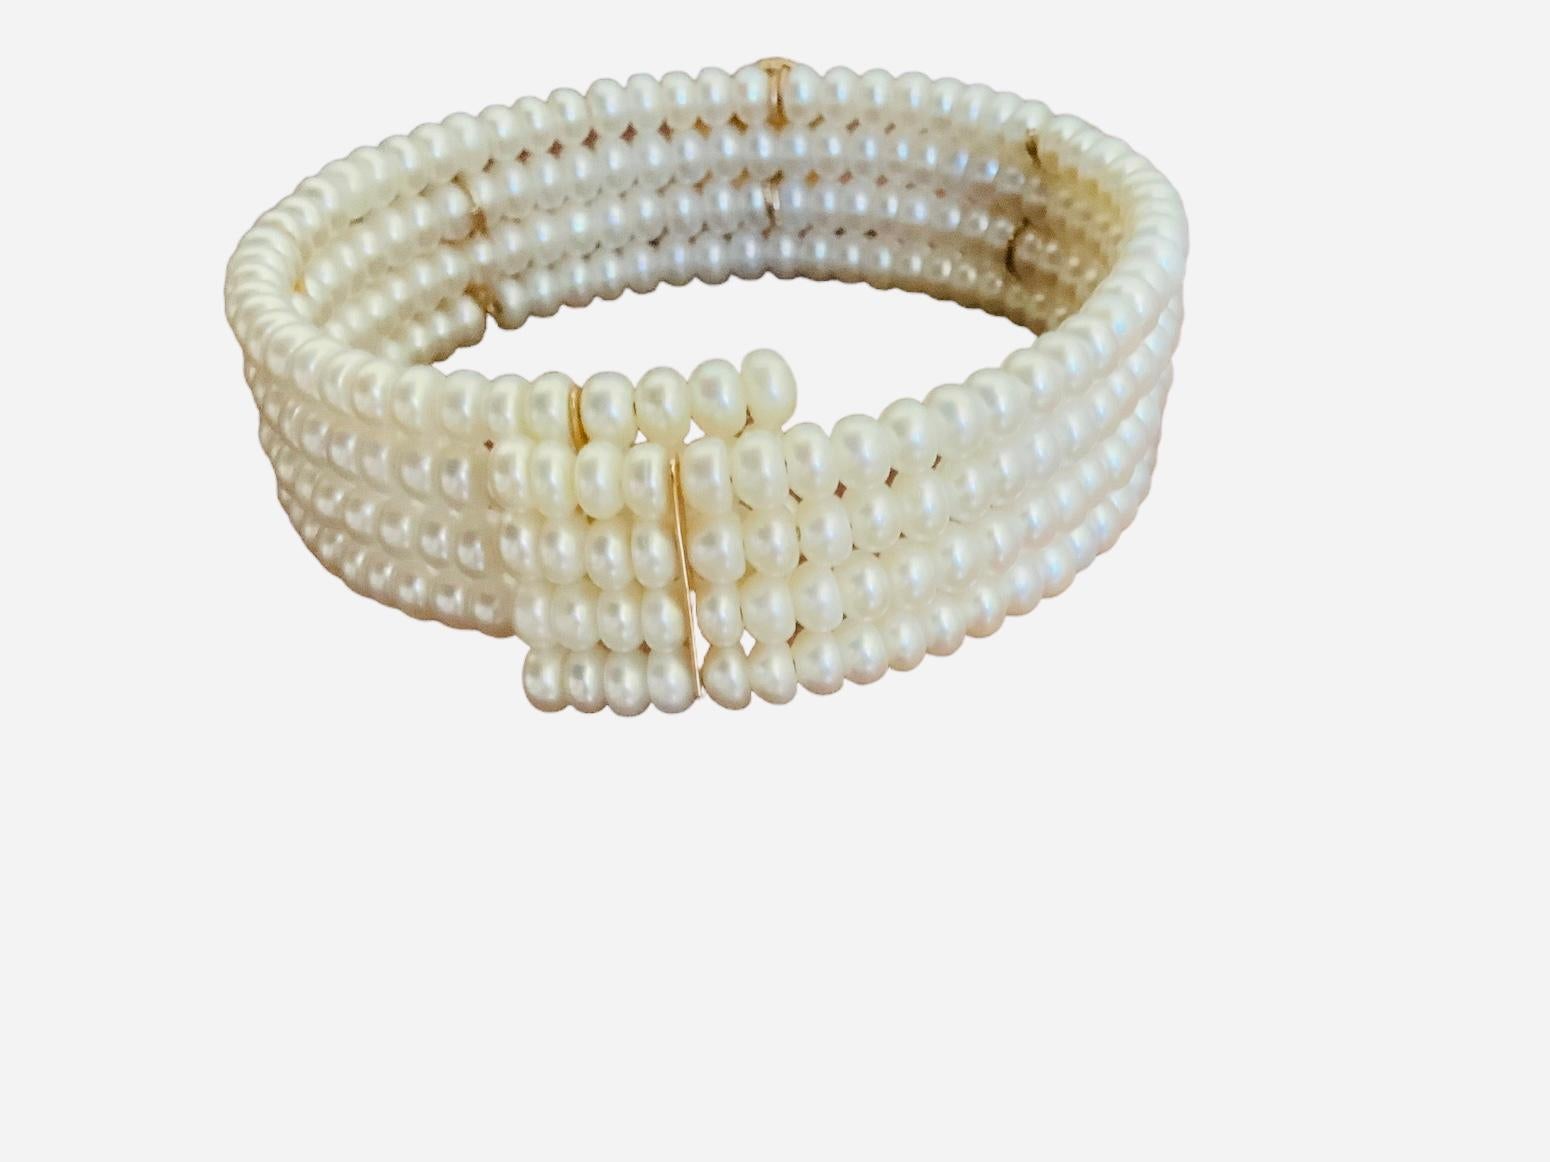 This is a set of 14K yellow and white gold pearls cuff bracelet and choker necklace. Both of them depicts four rows of round pearls very well mounted in stretching wire like, so they can easily open and close. In the center, each of them are